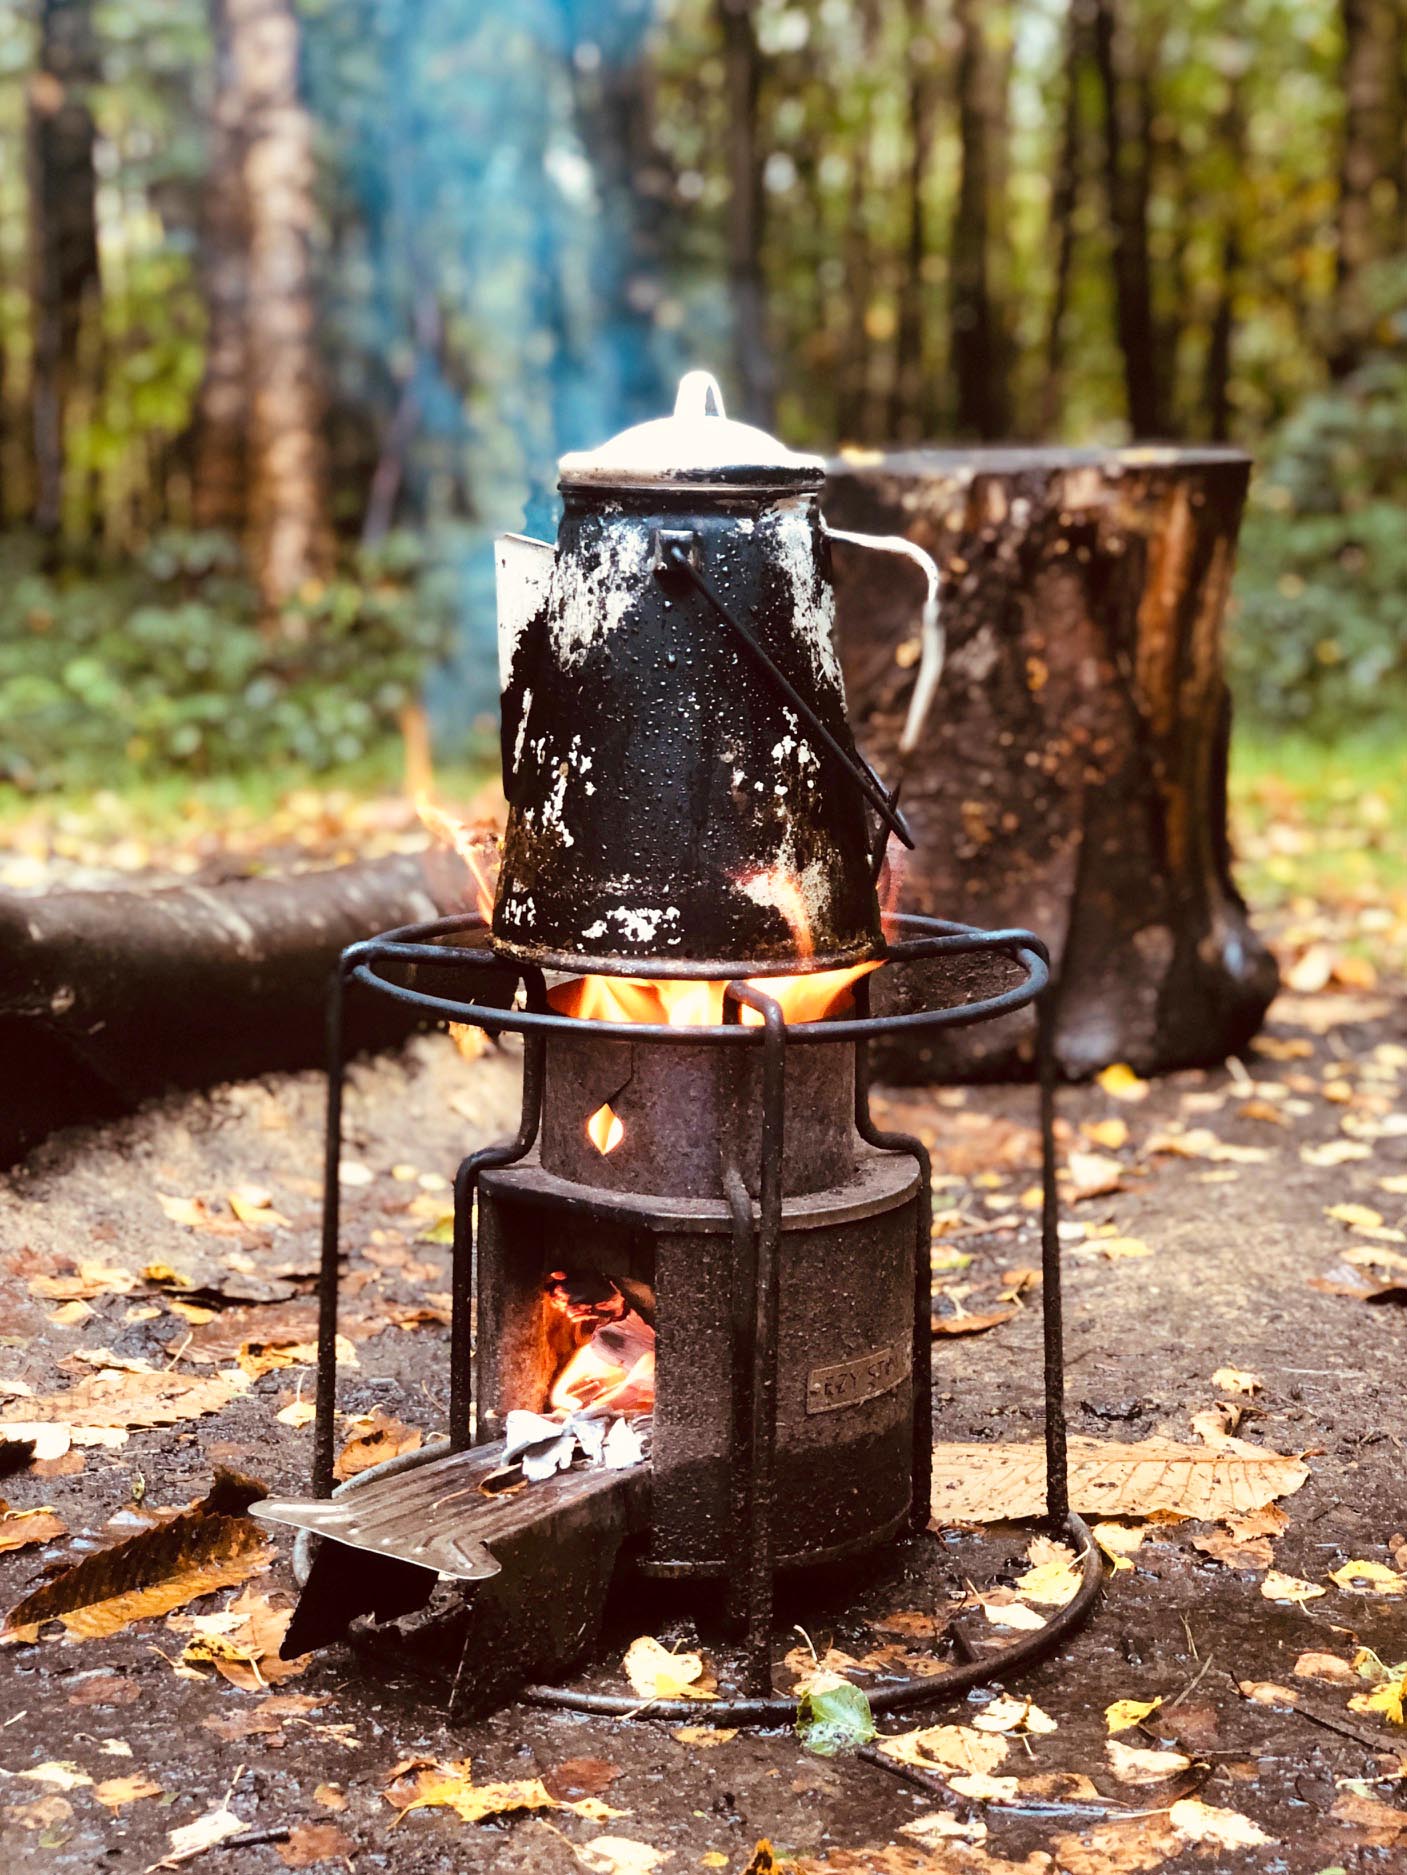 incorporating wood stove in Mass Heating system (rocket mass heater forum at permies)